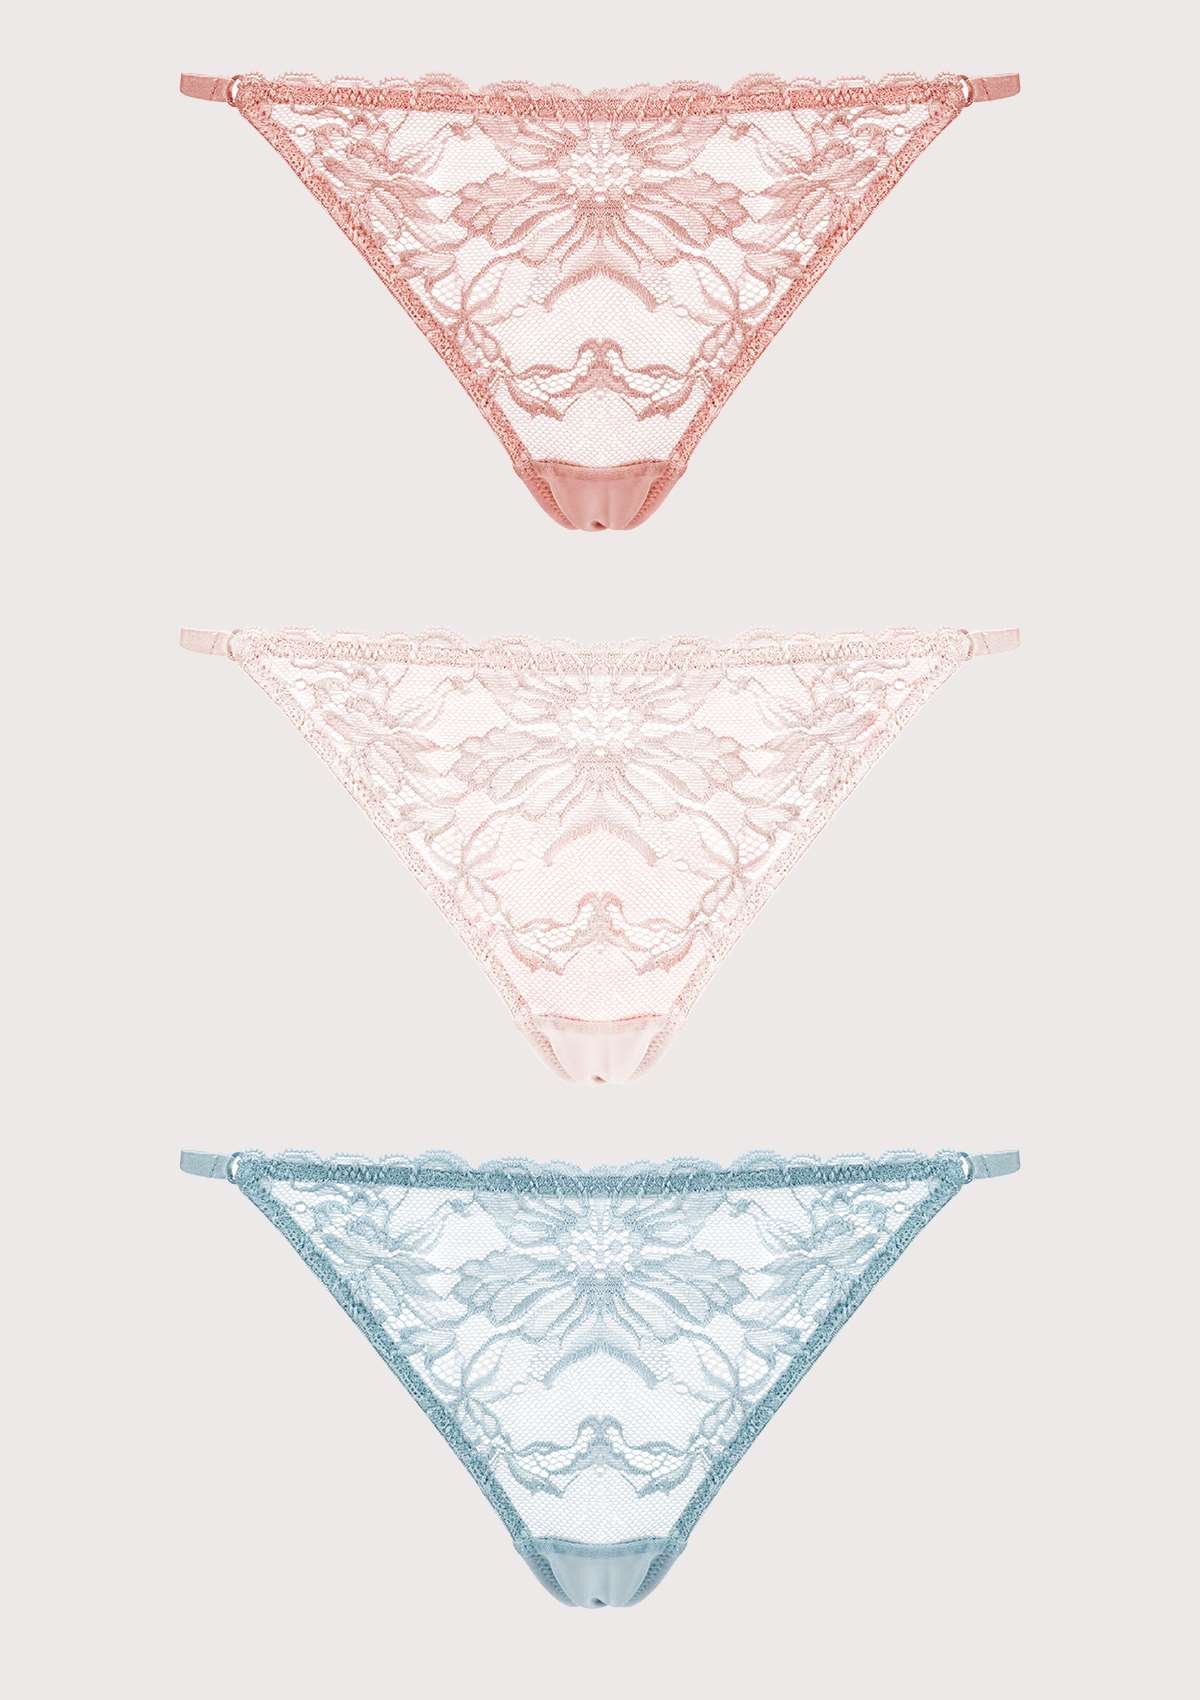 HSIA Pretty In Petals: 3-Pack Of Sexy Floral Chic Lace String Thongs - M / Light Coral+Dusty Peach+Pewter Blue